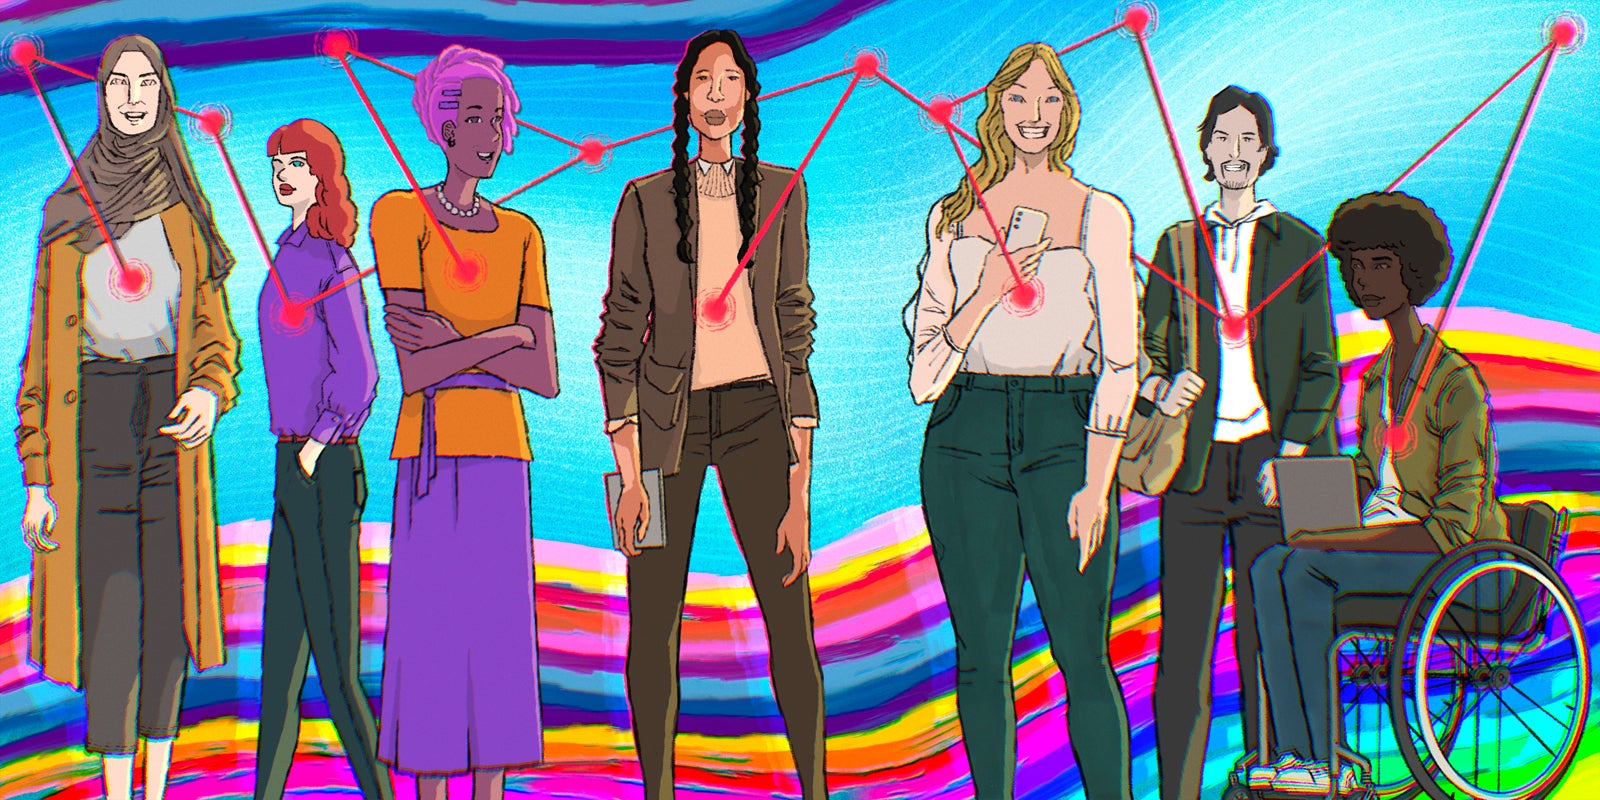 illustration of several diverse women standing and looking confident with a colorful wave in the background as this blog is about how women leaders can build strong networks